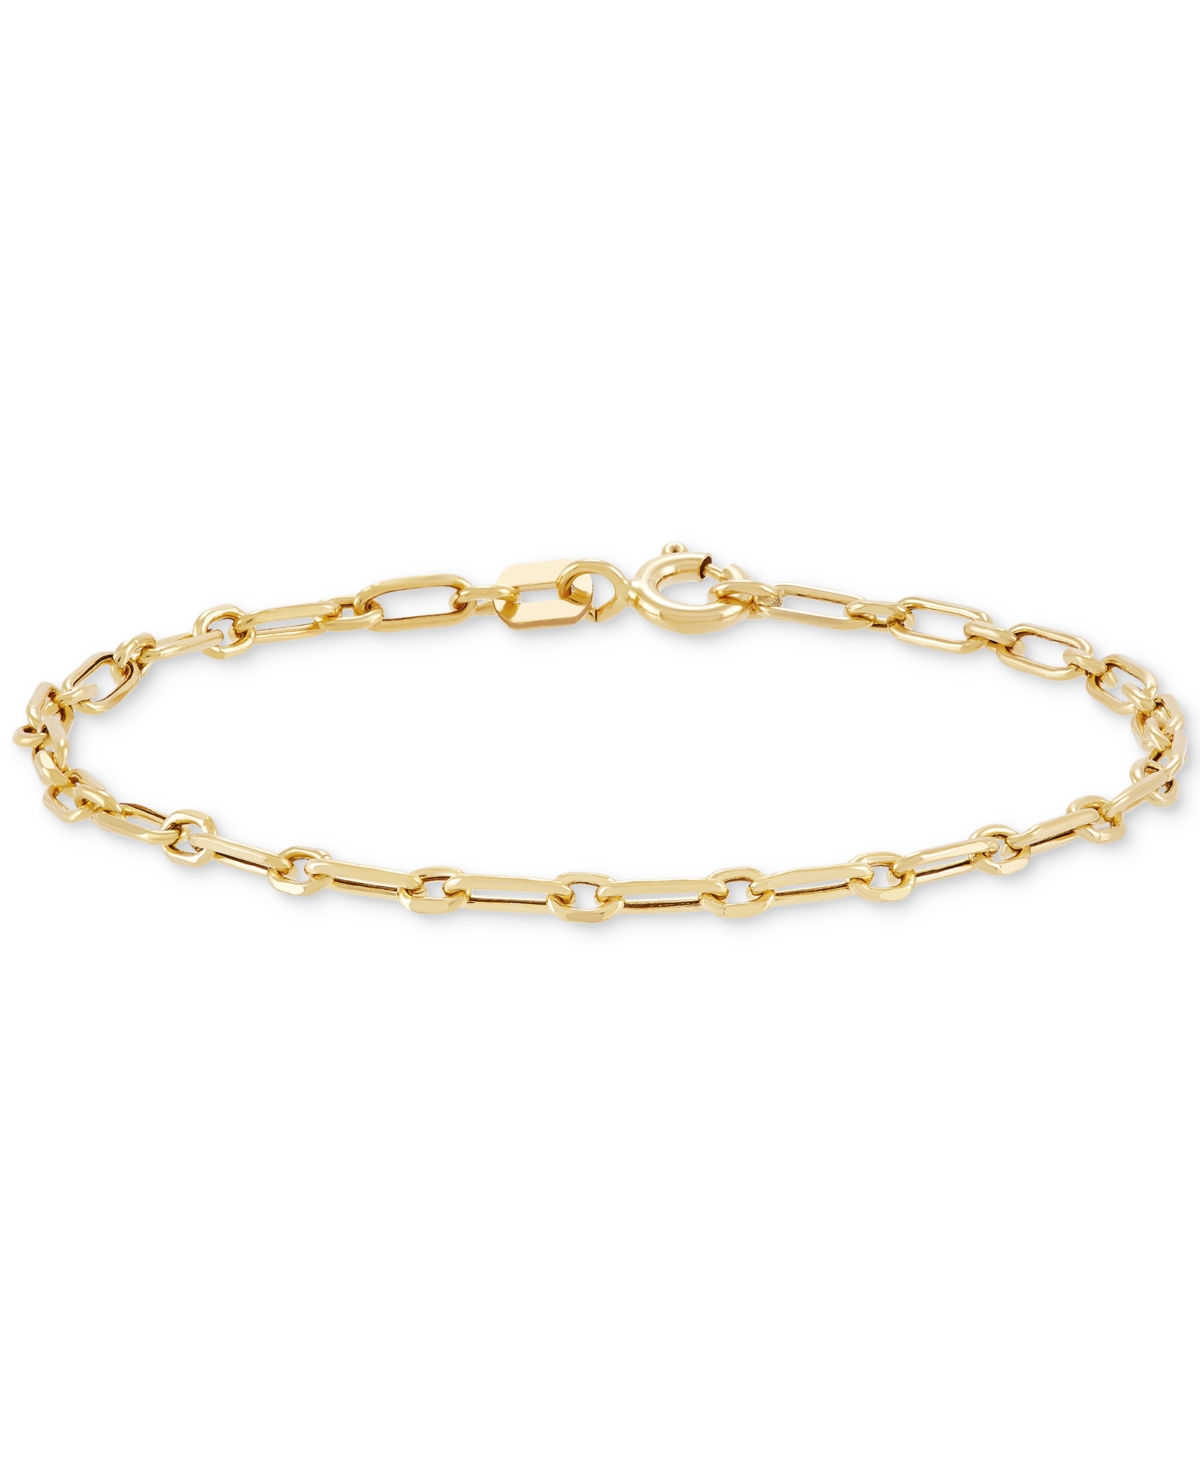 Italian Gold Paperclip Link Chain Bracelet In 14k Gold In Yellow Gold